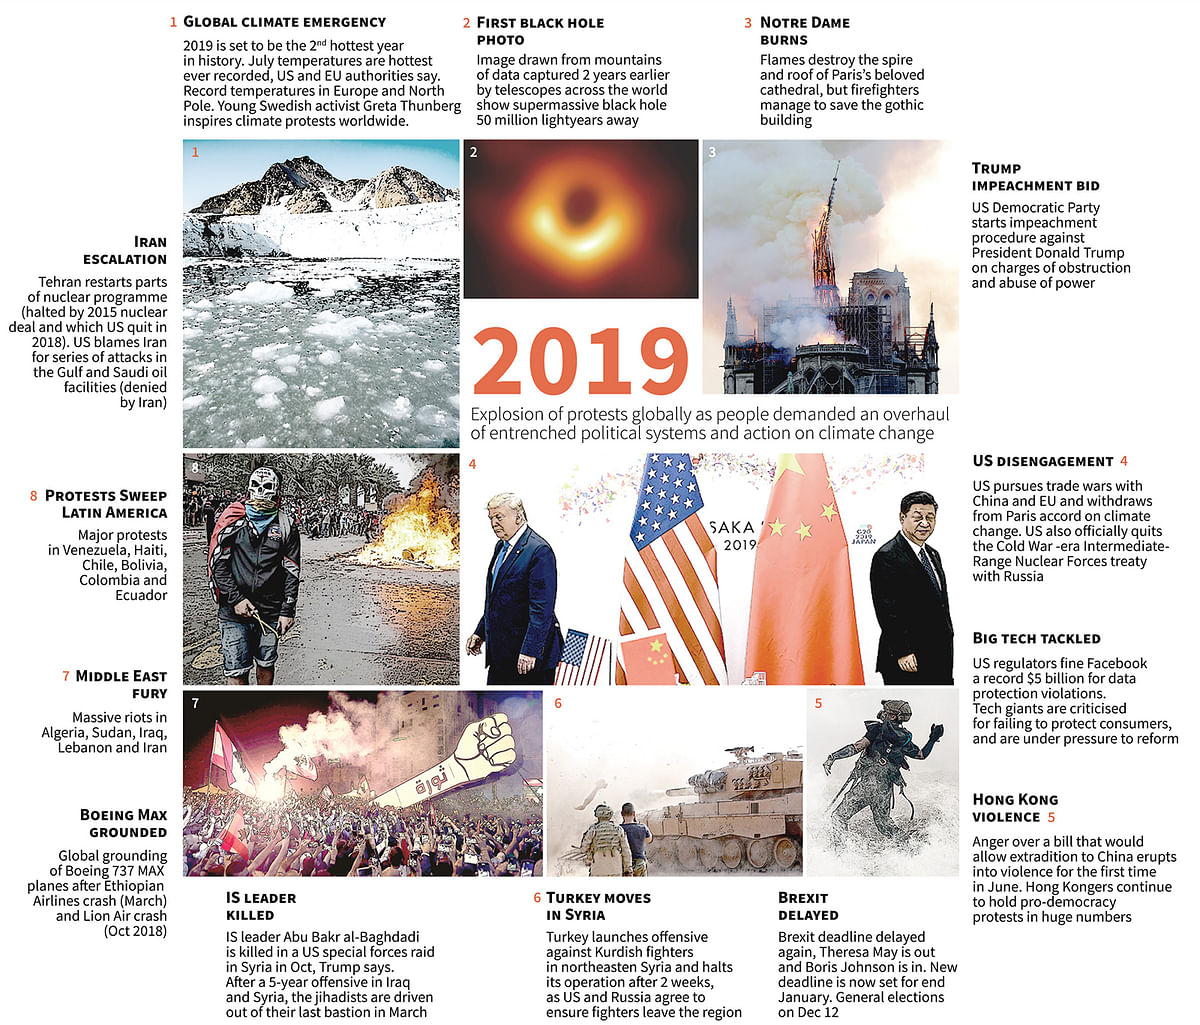 Graphic on key events in 2019, marked by an explosion of demonstrations across the world as people demanded an overhaul of entrenched political systems and action on climate change. Photo: AFP